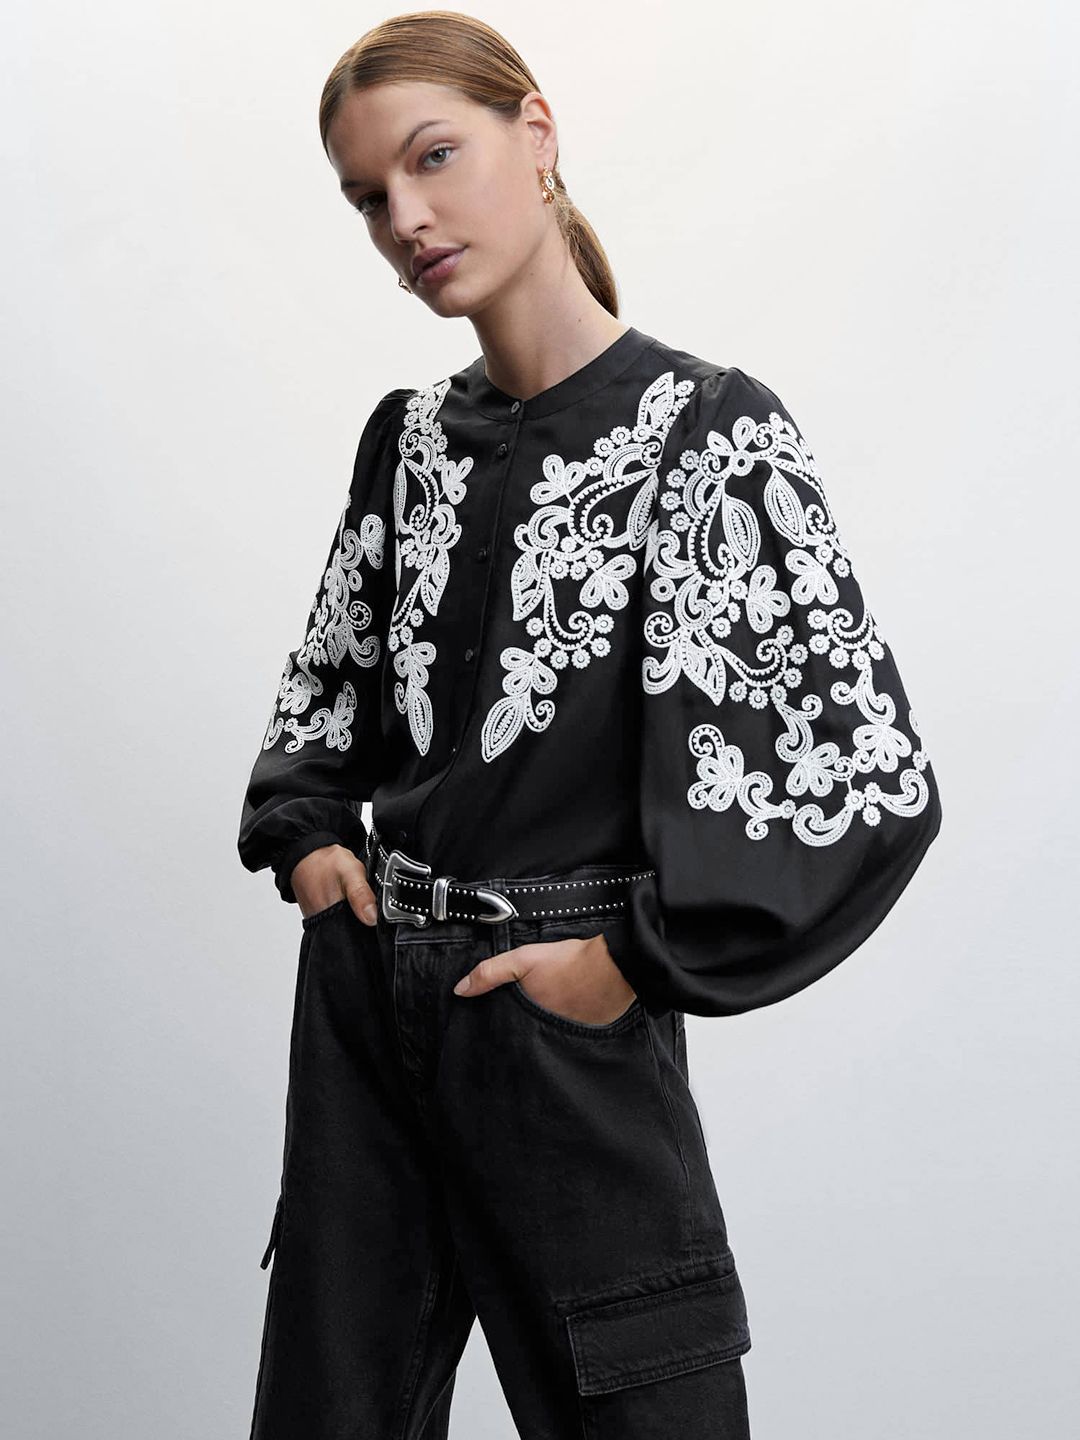 MANGO Floral Embroidered Monochrome Shirt Style Sustainable Top Price in India